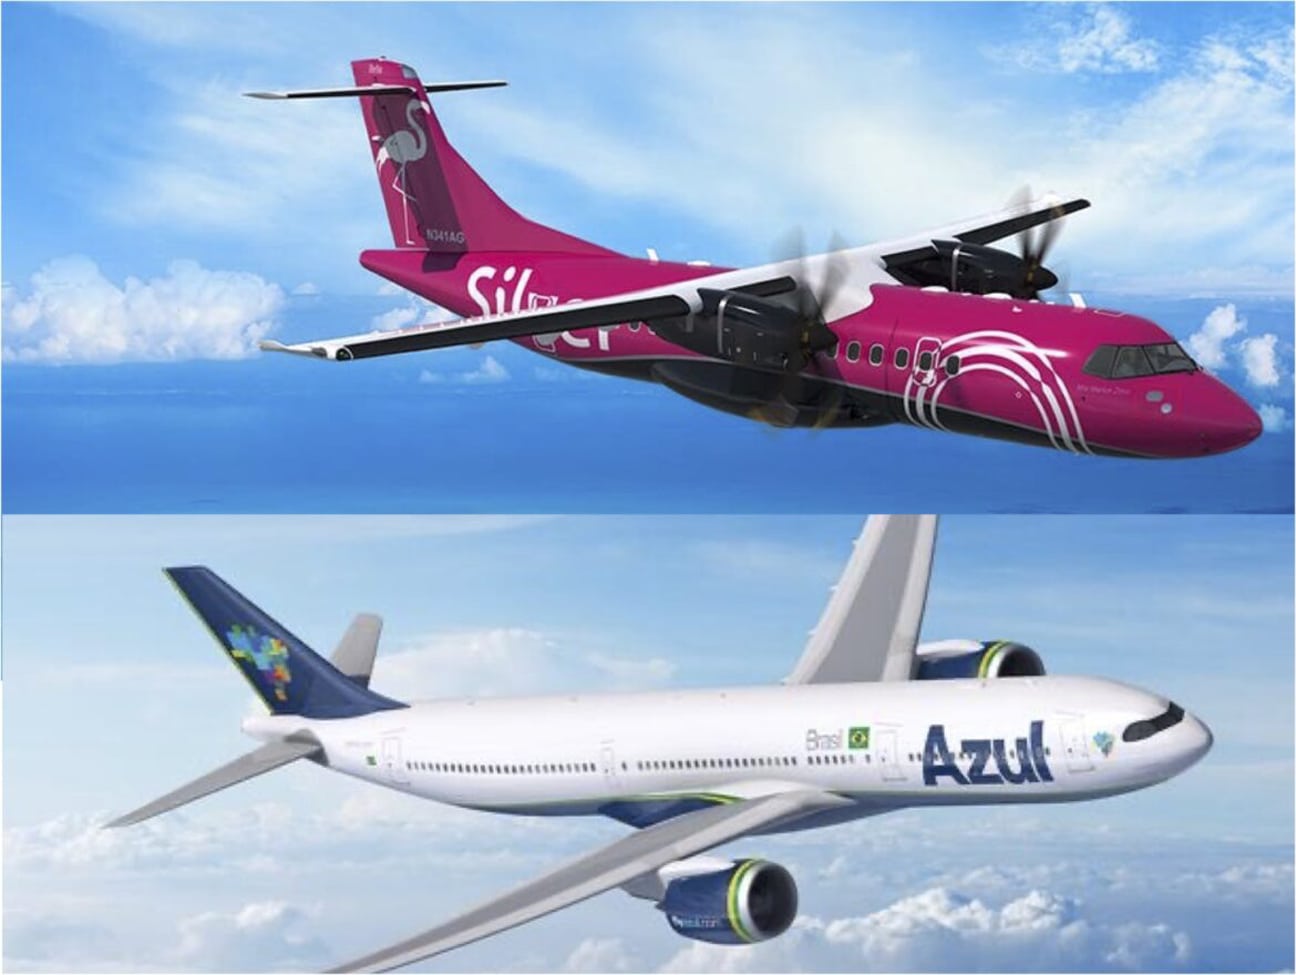 Azul Airlines - Flights from Lisbon and Paris to Brazil